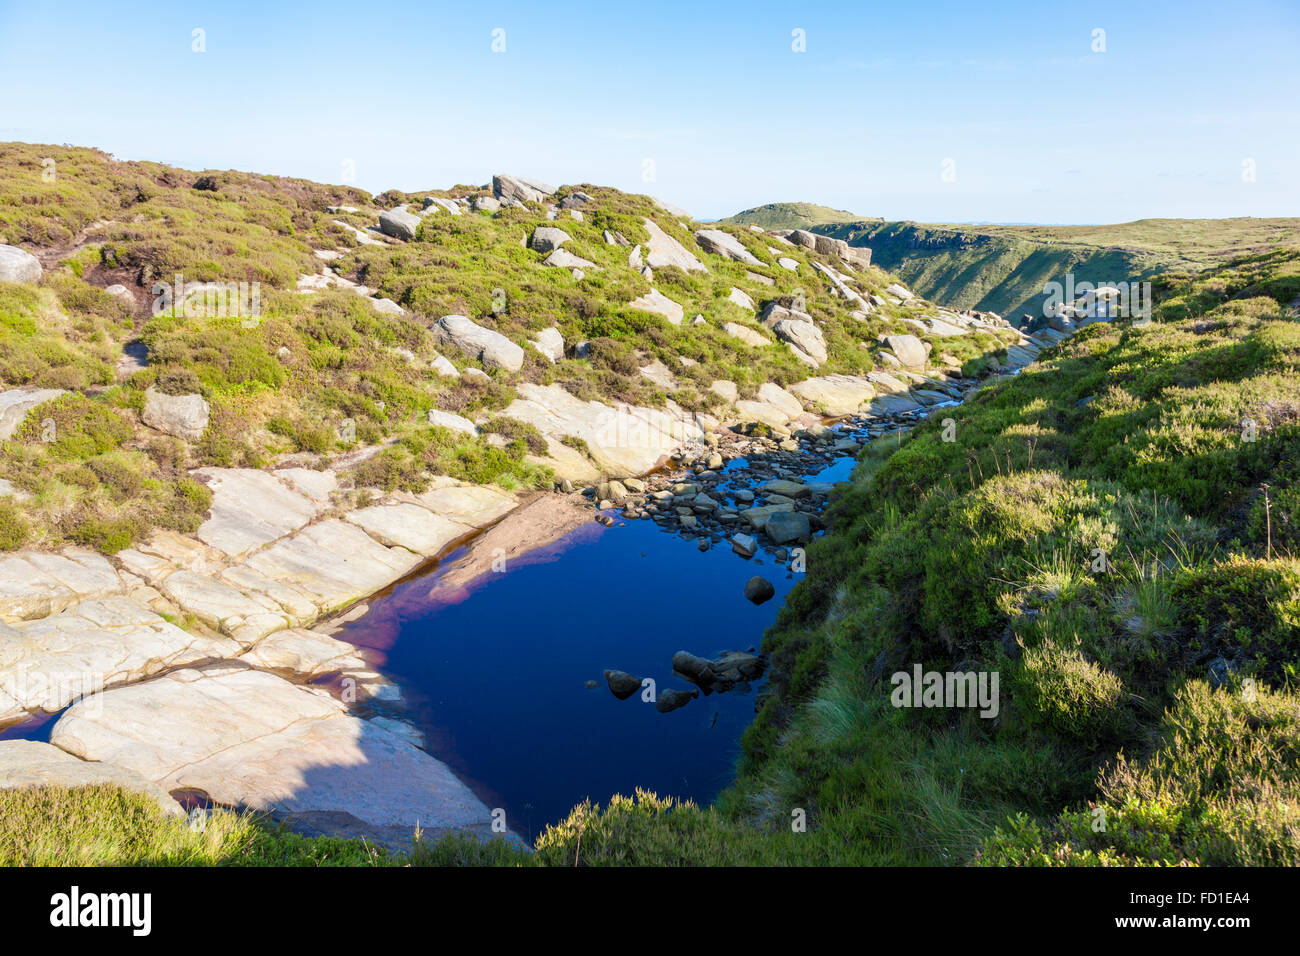 Stream and small pool of water on moorland in Summer. Part of the southern edge of Kinder Scout, Derbyshire, Peak District National Park, England, UK Stock Photo